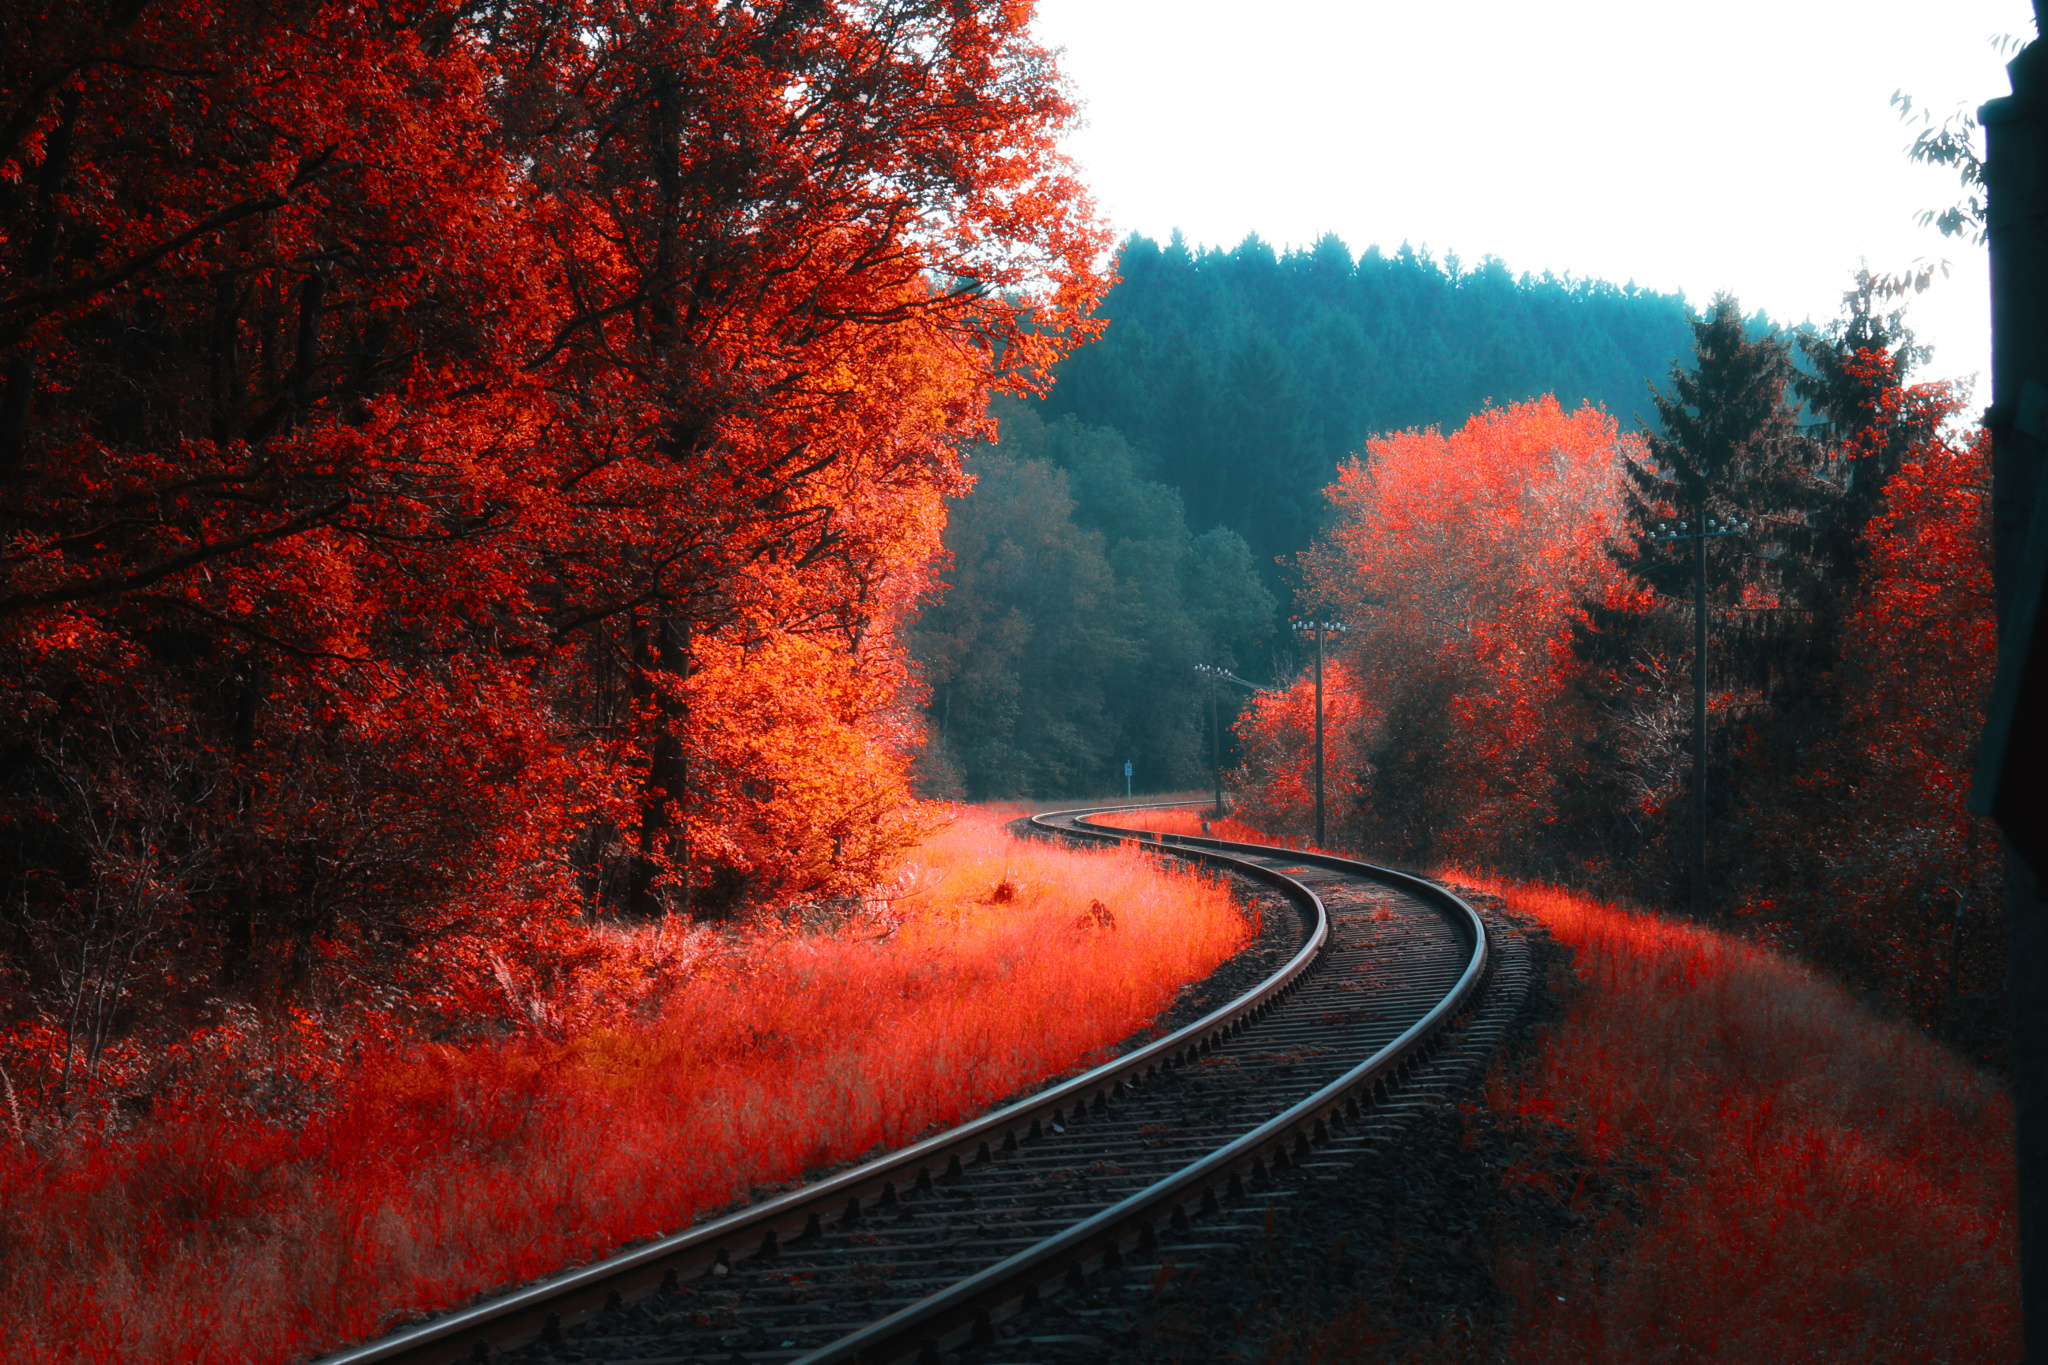 General 2048x1365 landscape forest trees fall railway colorful leaves